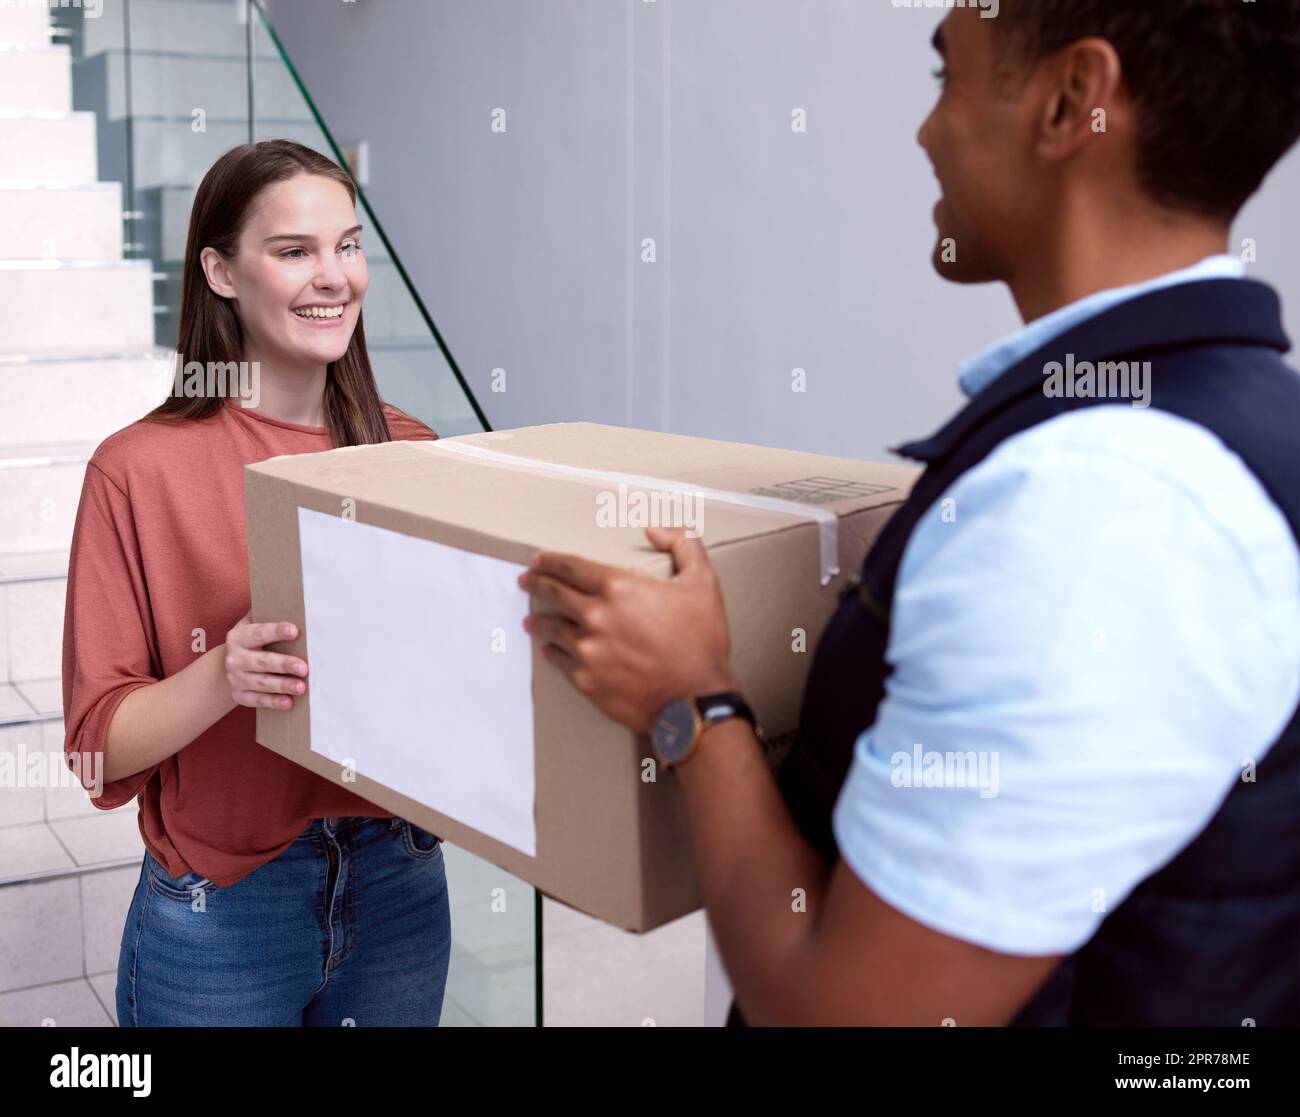 Im glad that I caught you. Shot of a woman accepting her delivery from the delivery man. Stock Photo